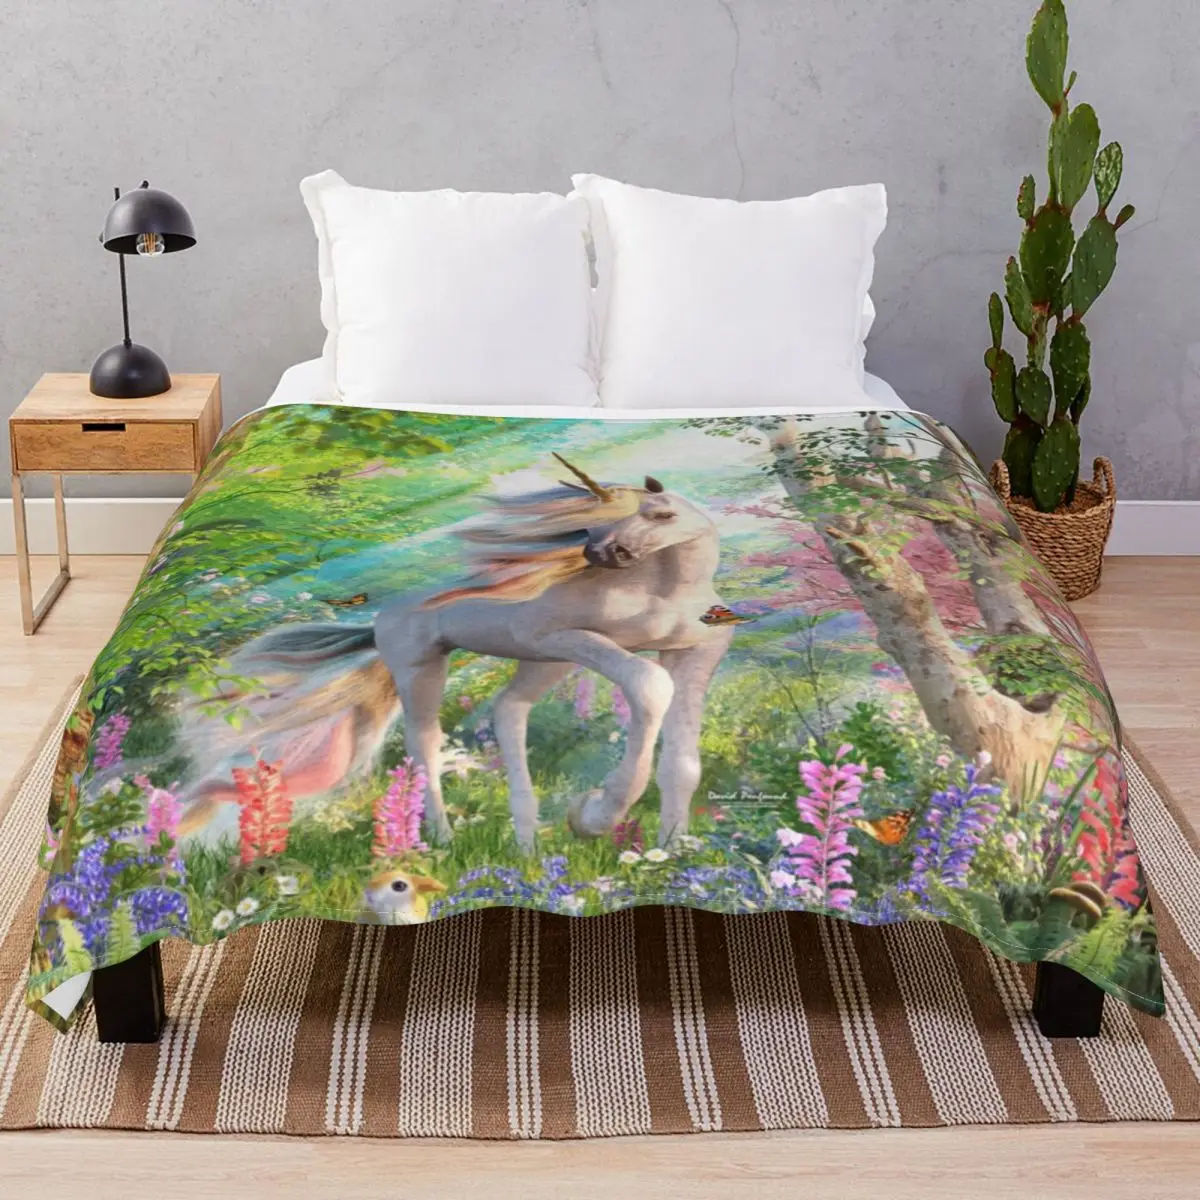 Unicorn Enchanted Forest Blankets Coral Fleece Autumn/Winter Portable Throw Blanket for Bed Home Couch Travel Cinema